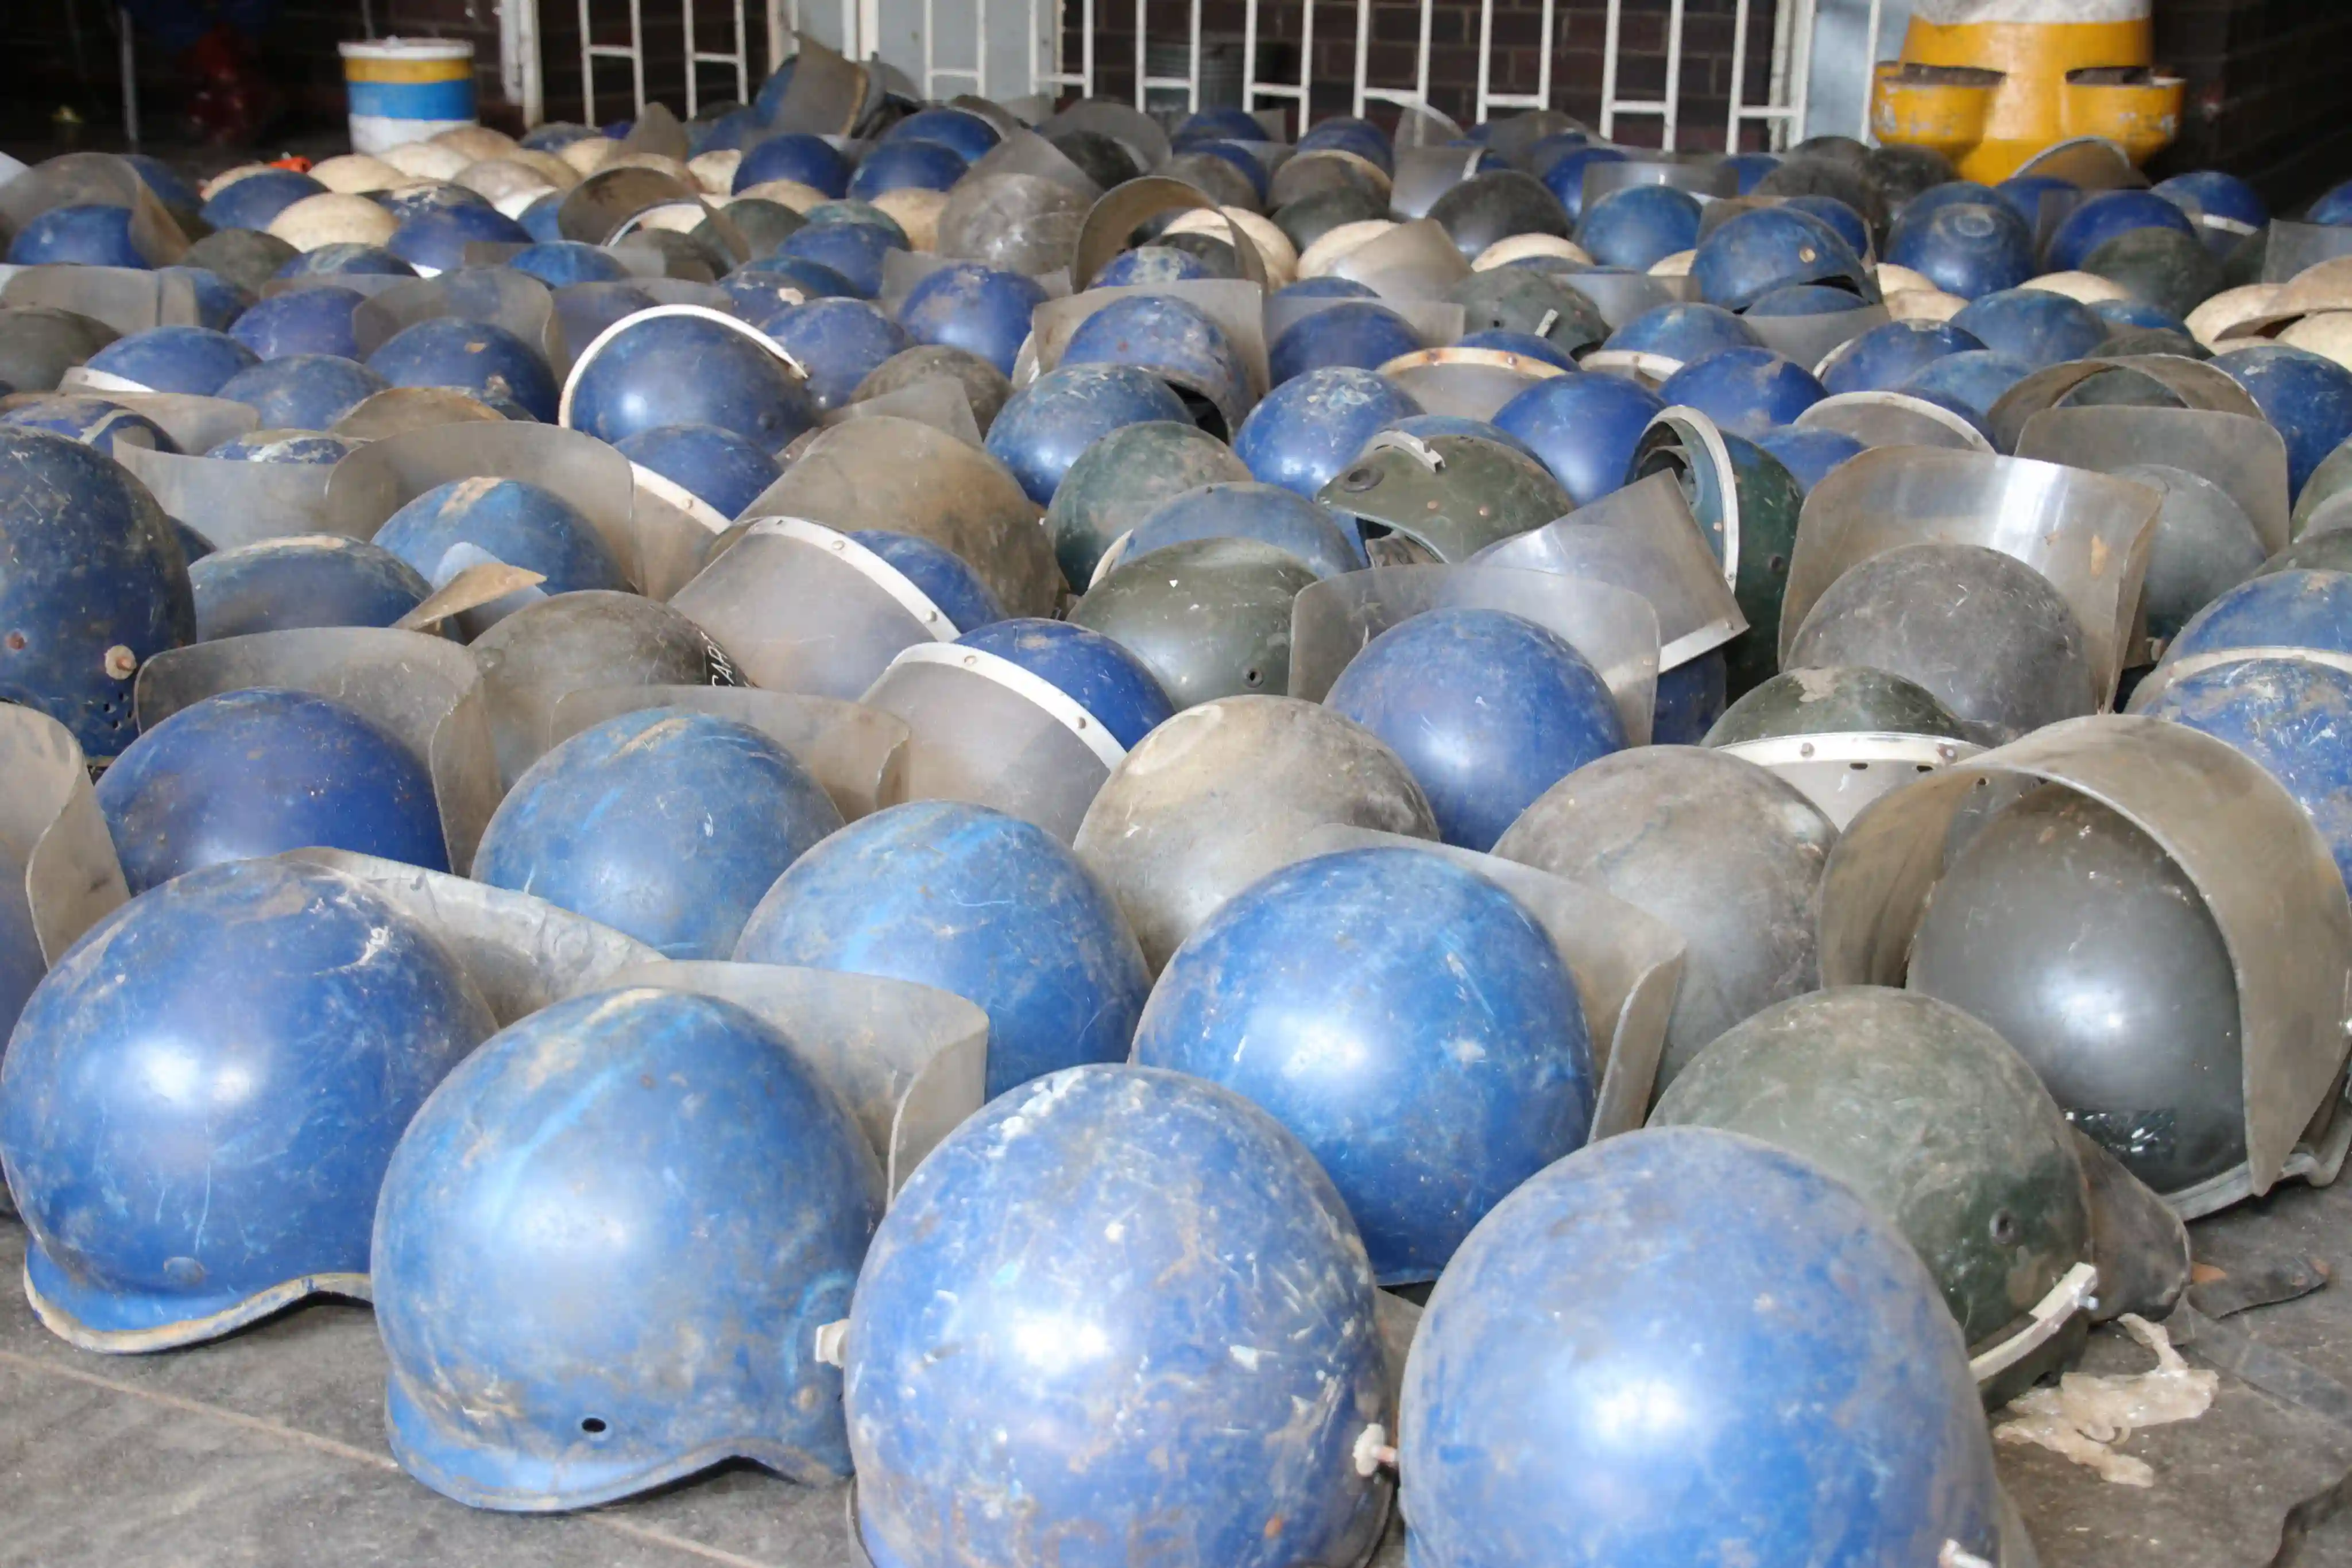 ZRP Claim One Of The Helmets Discovered Near MT House Belonged To A Police Officer Who Was Stoned To Death In 2016